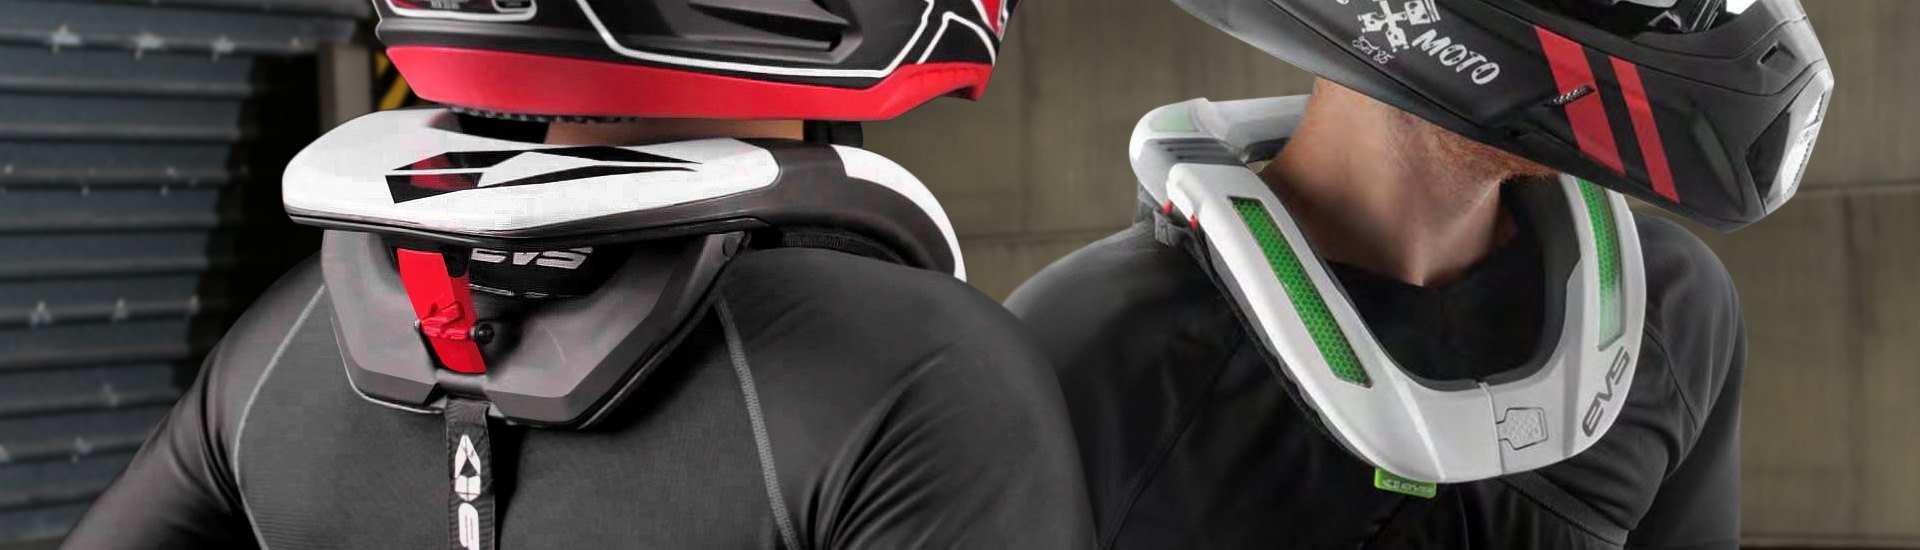 Motorcycle Neck Braces, Support & Protection Collars